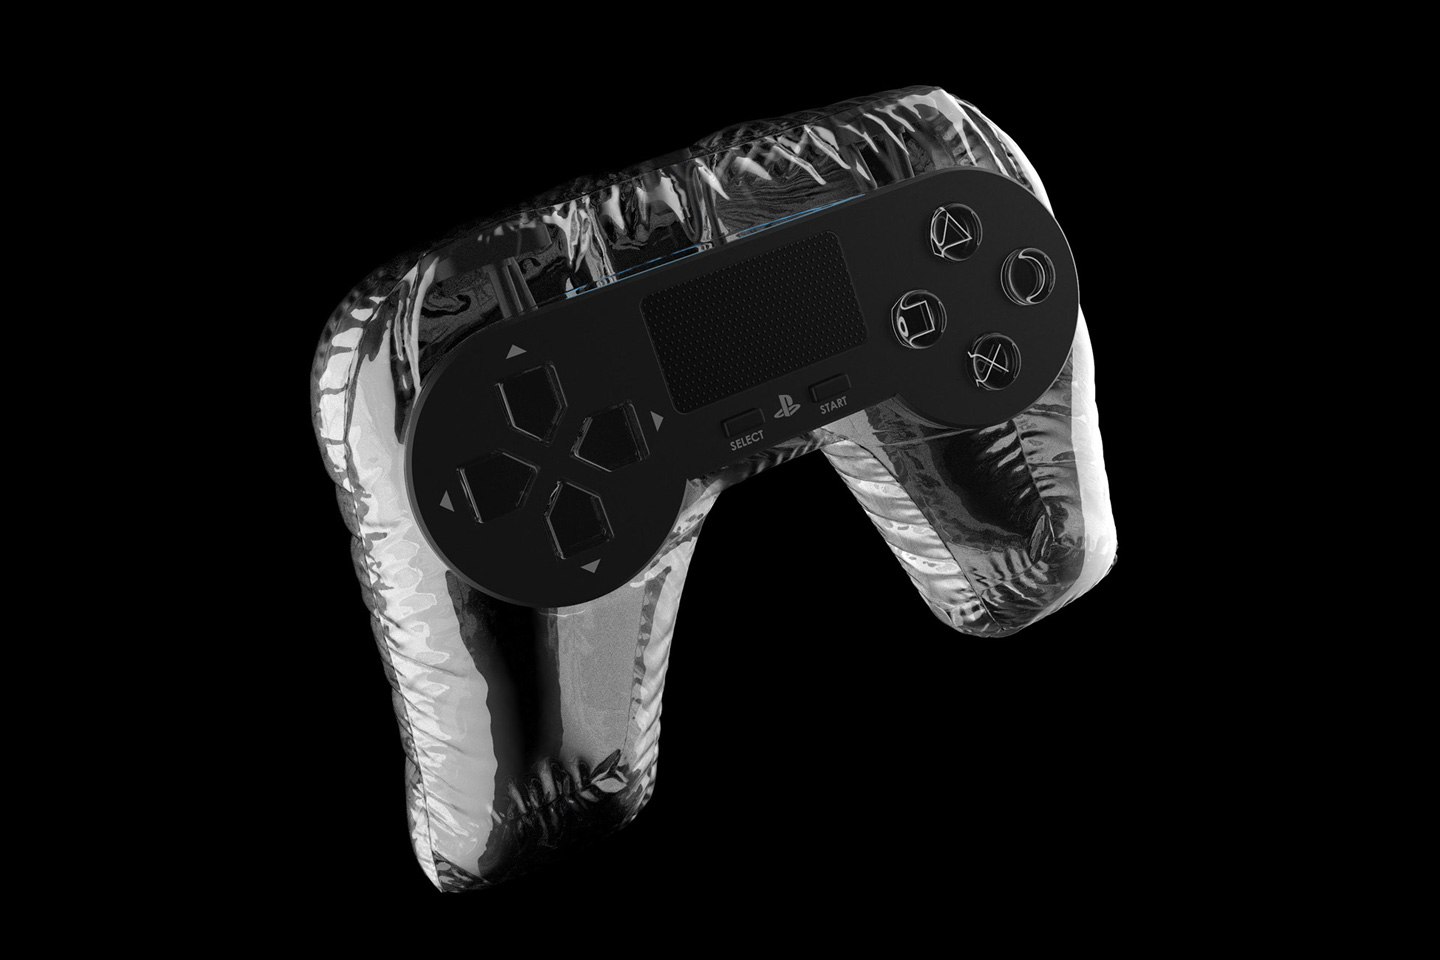 #Inflatable PlayStation controller design is either a mad pipe dream or sheer ergonomic genius